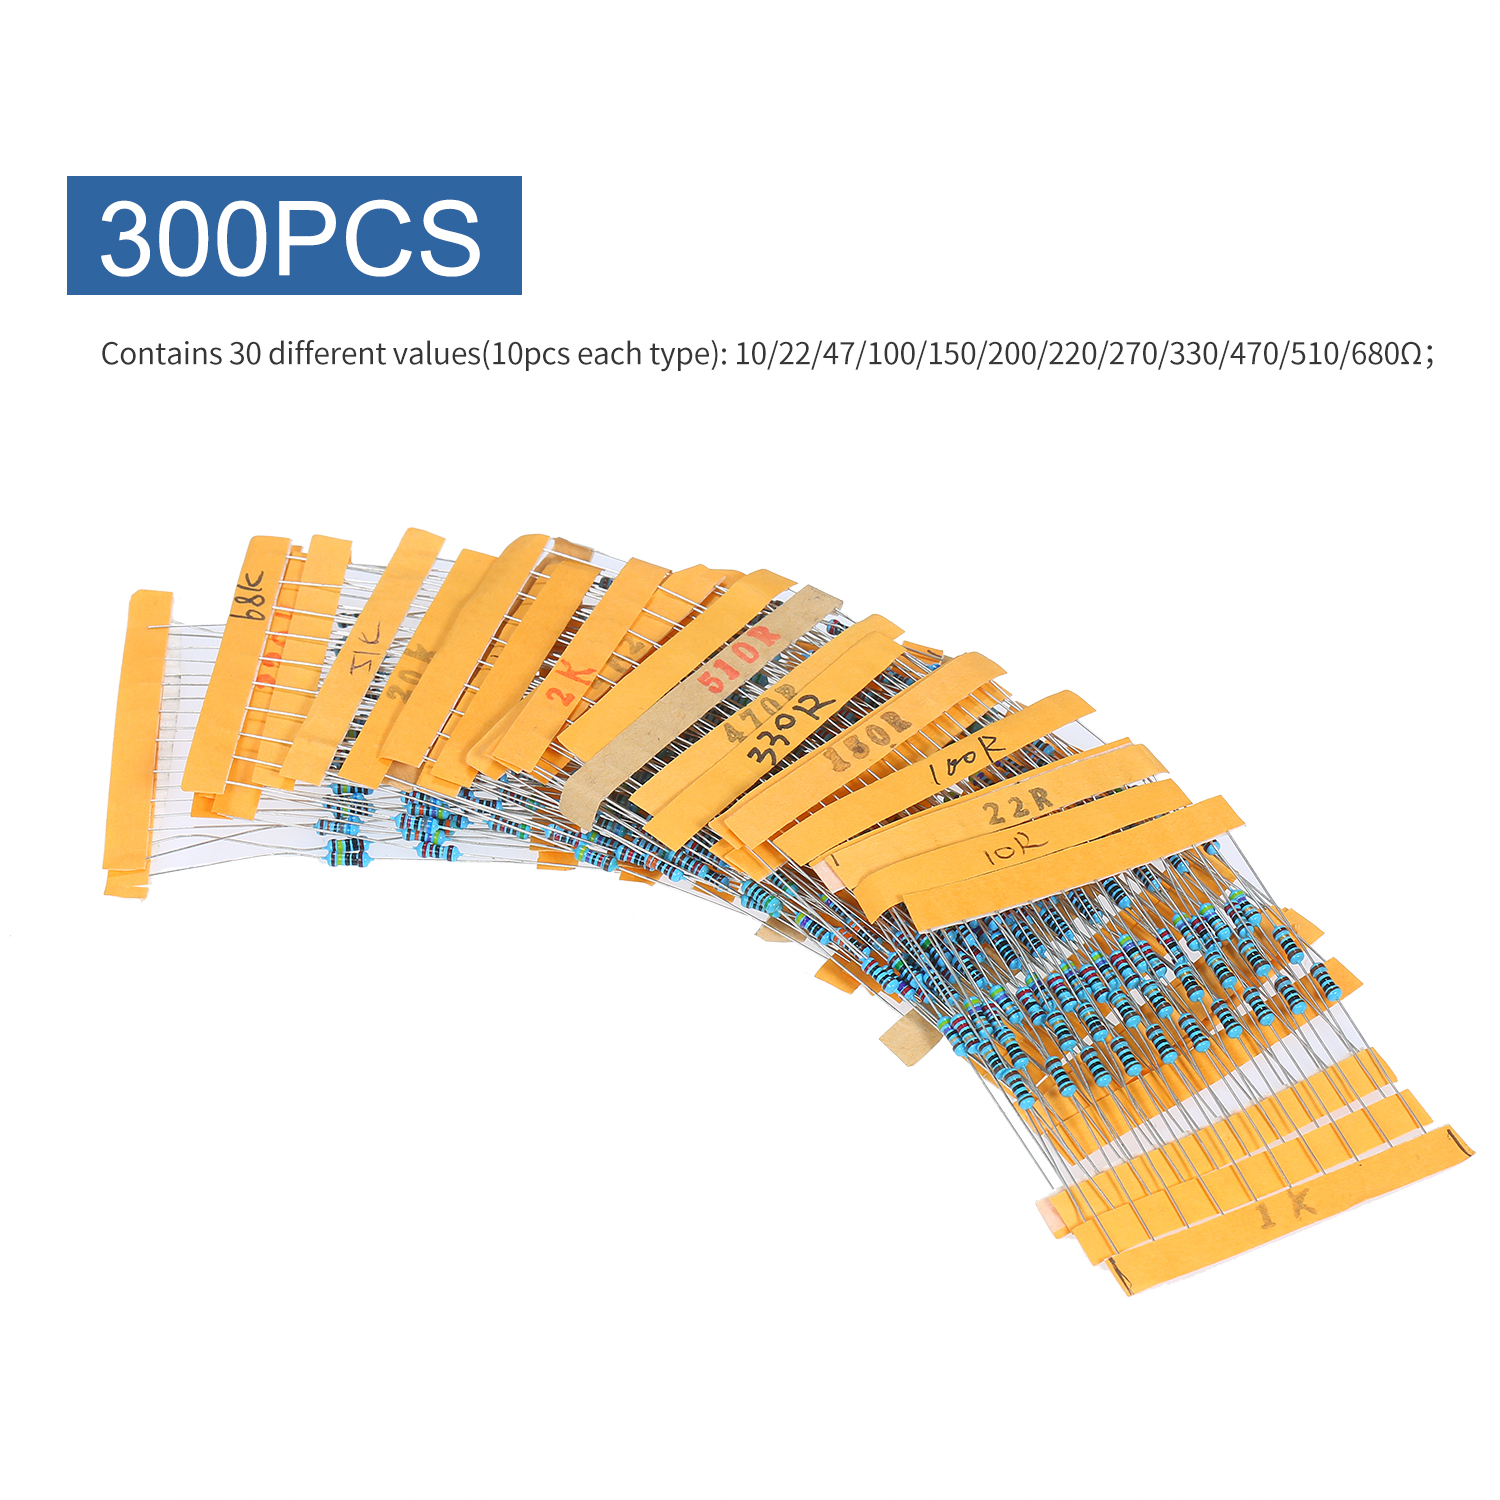 300PCS 1/4W Chromatic Ring Resistor Metal Film Resistor Assortment Kit with Permissible Error ±1% 30 Resistance Values 10/22/47/100/150/200/220/270/330/470/510/680 ohm 1/2/2.2/3.3/4.7/5.1/6.8/10/20/4 - image 3 of 7